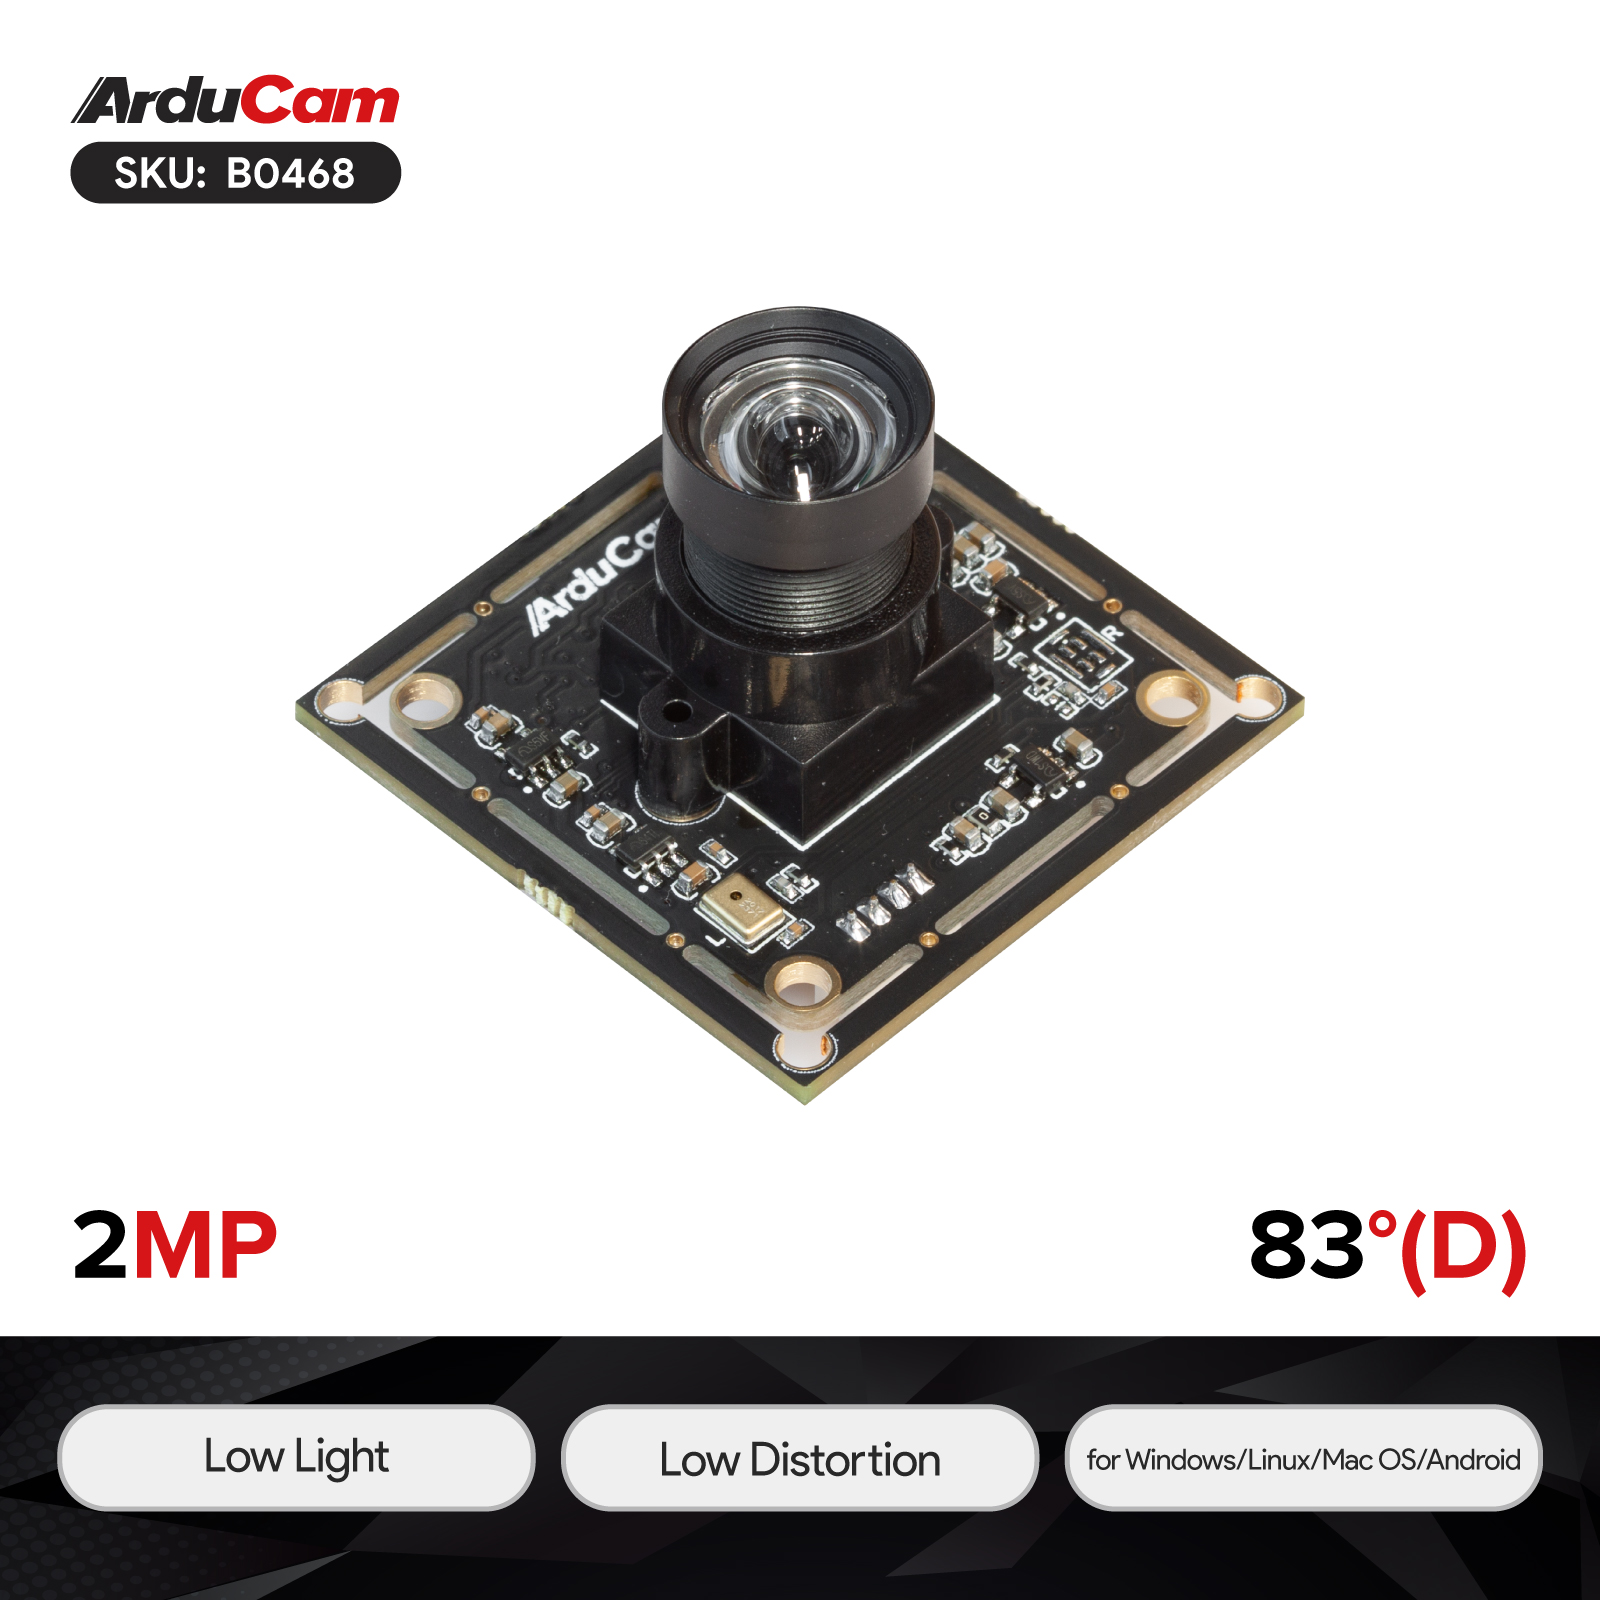 Arducam 1080P Low Light WDR Ultra Wide Angle USB Camera Module for  Computer, 2MP CMOS IMX291 160 Degree Fisheye Mini UVC USB2.0 Webcam Board  with